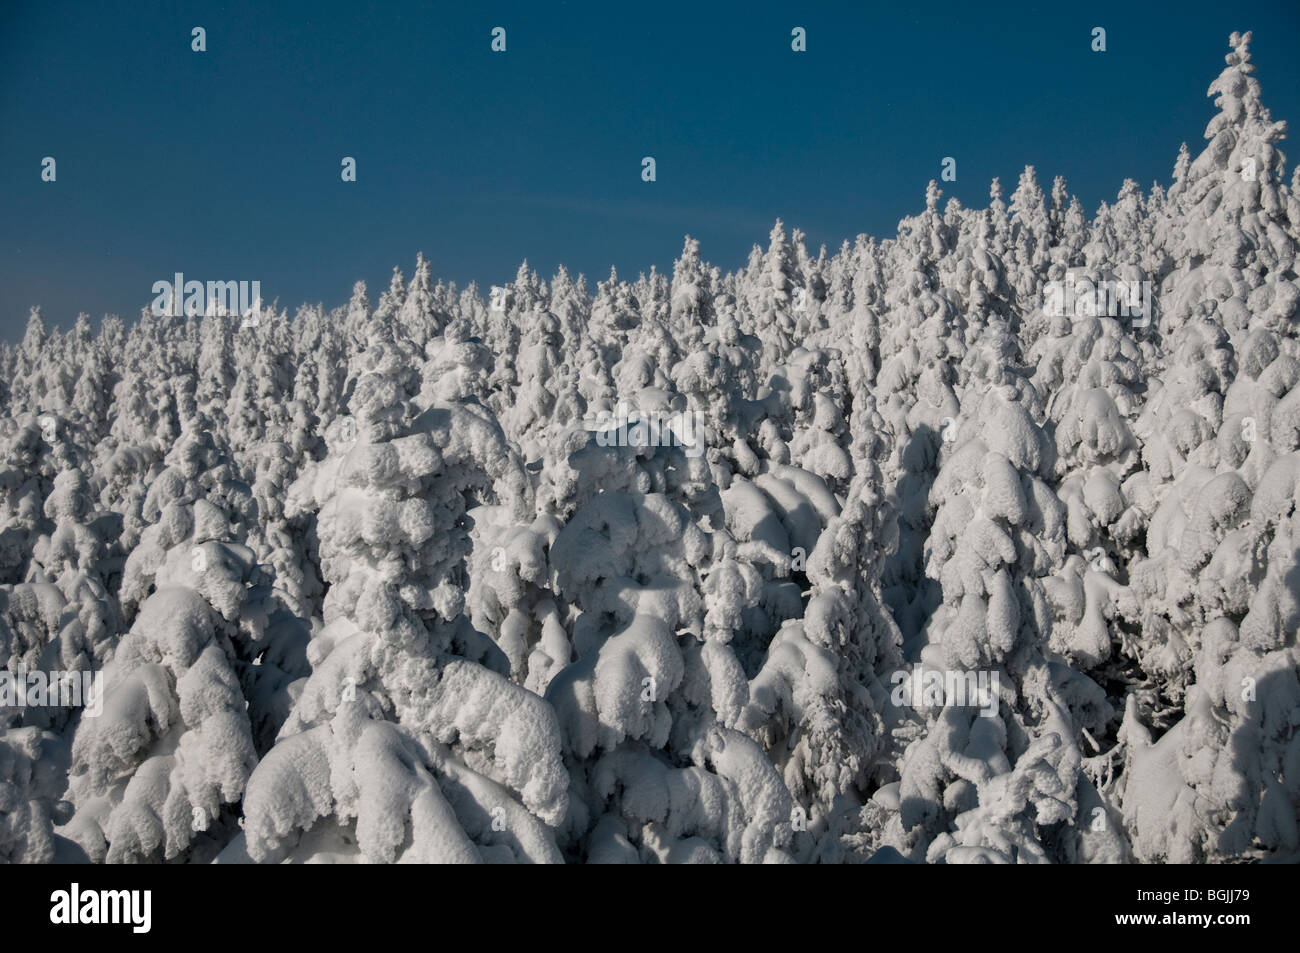 view of fir trees covered in snow at the summit of the Cerna Hora, Karkonosze, Czech Republic. Stock Photo